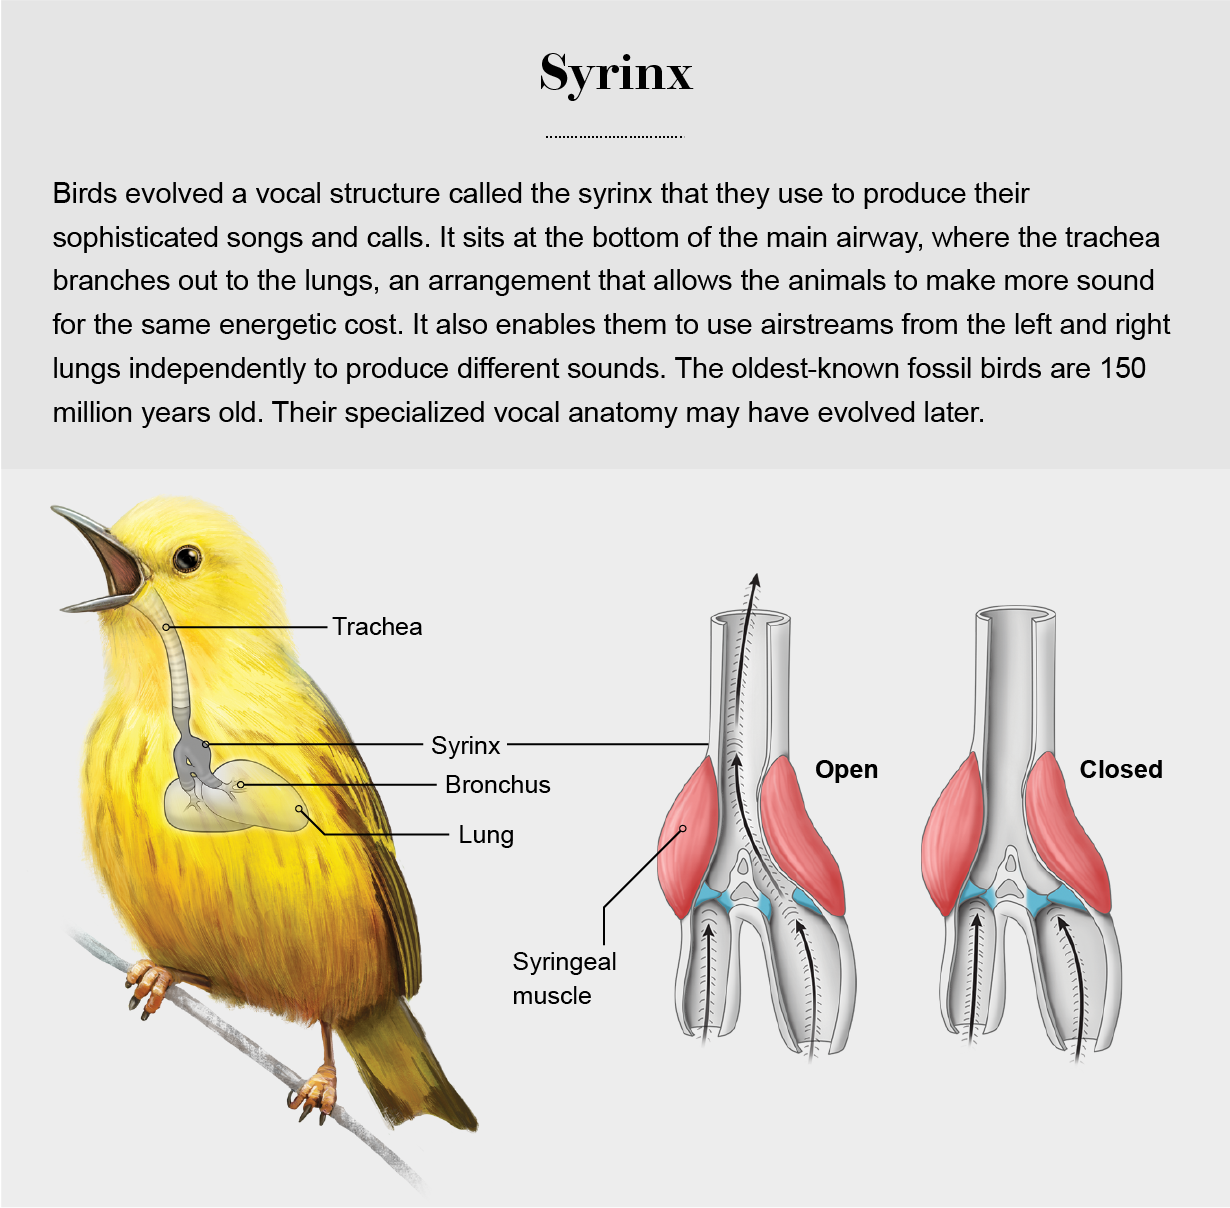 Anatomical diagram depicts the structure and function of the syrinx in a bird.